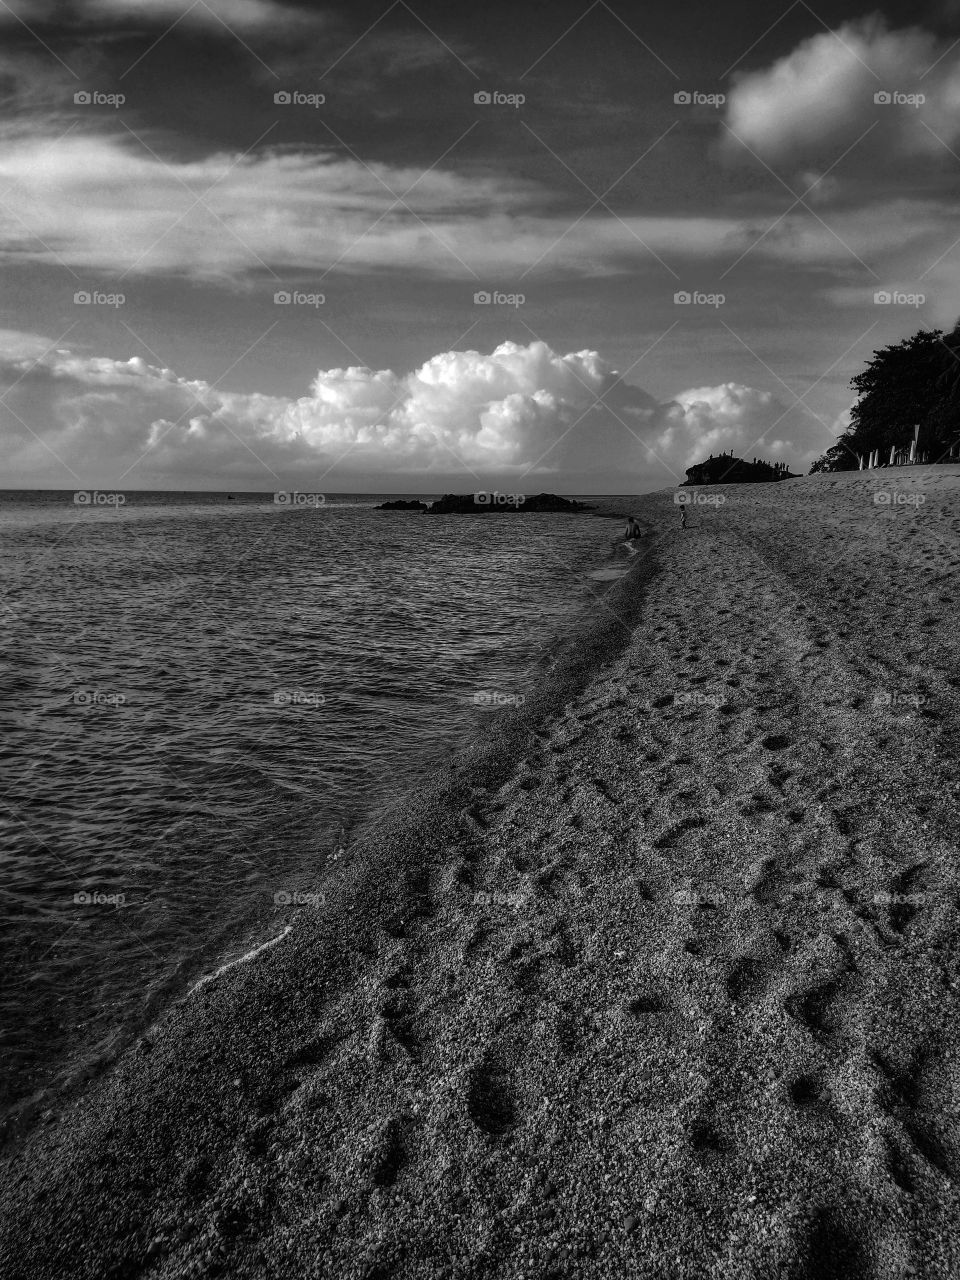 Seeing the sea, clouds, sand in black and white.
at Batangas Philppine